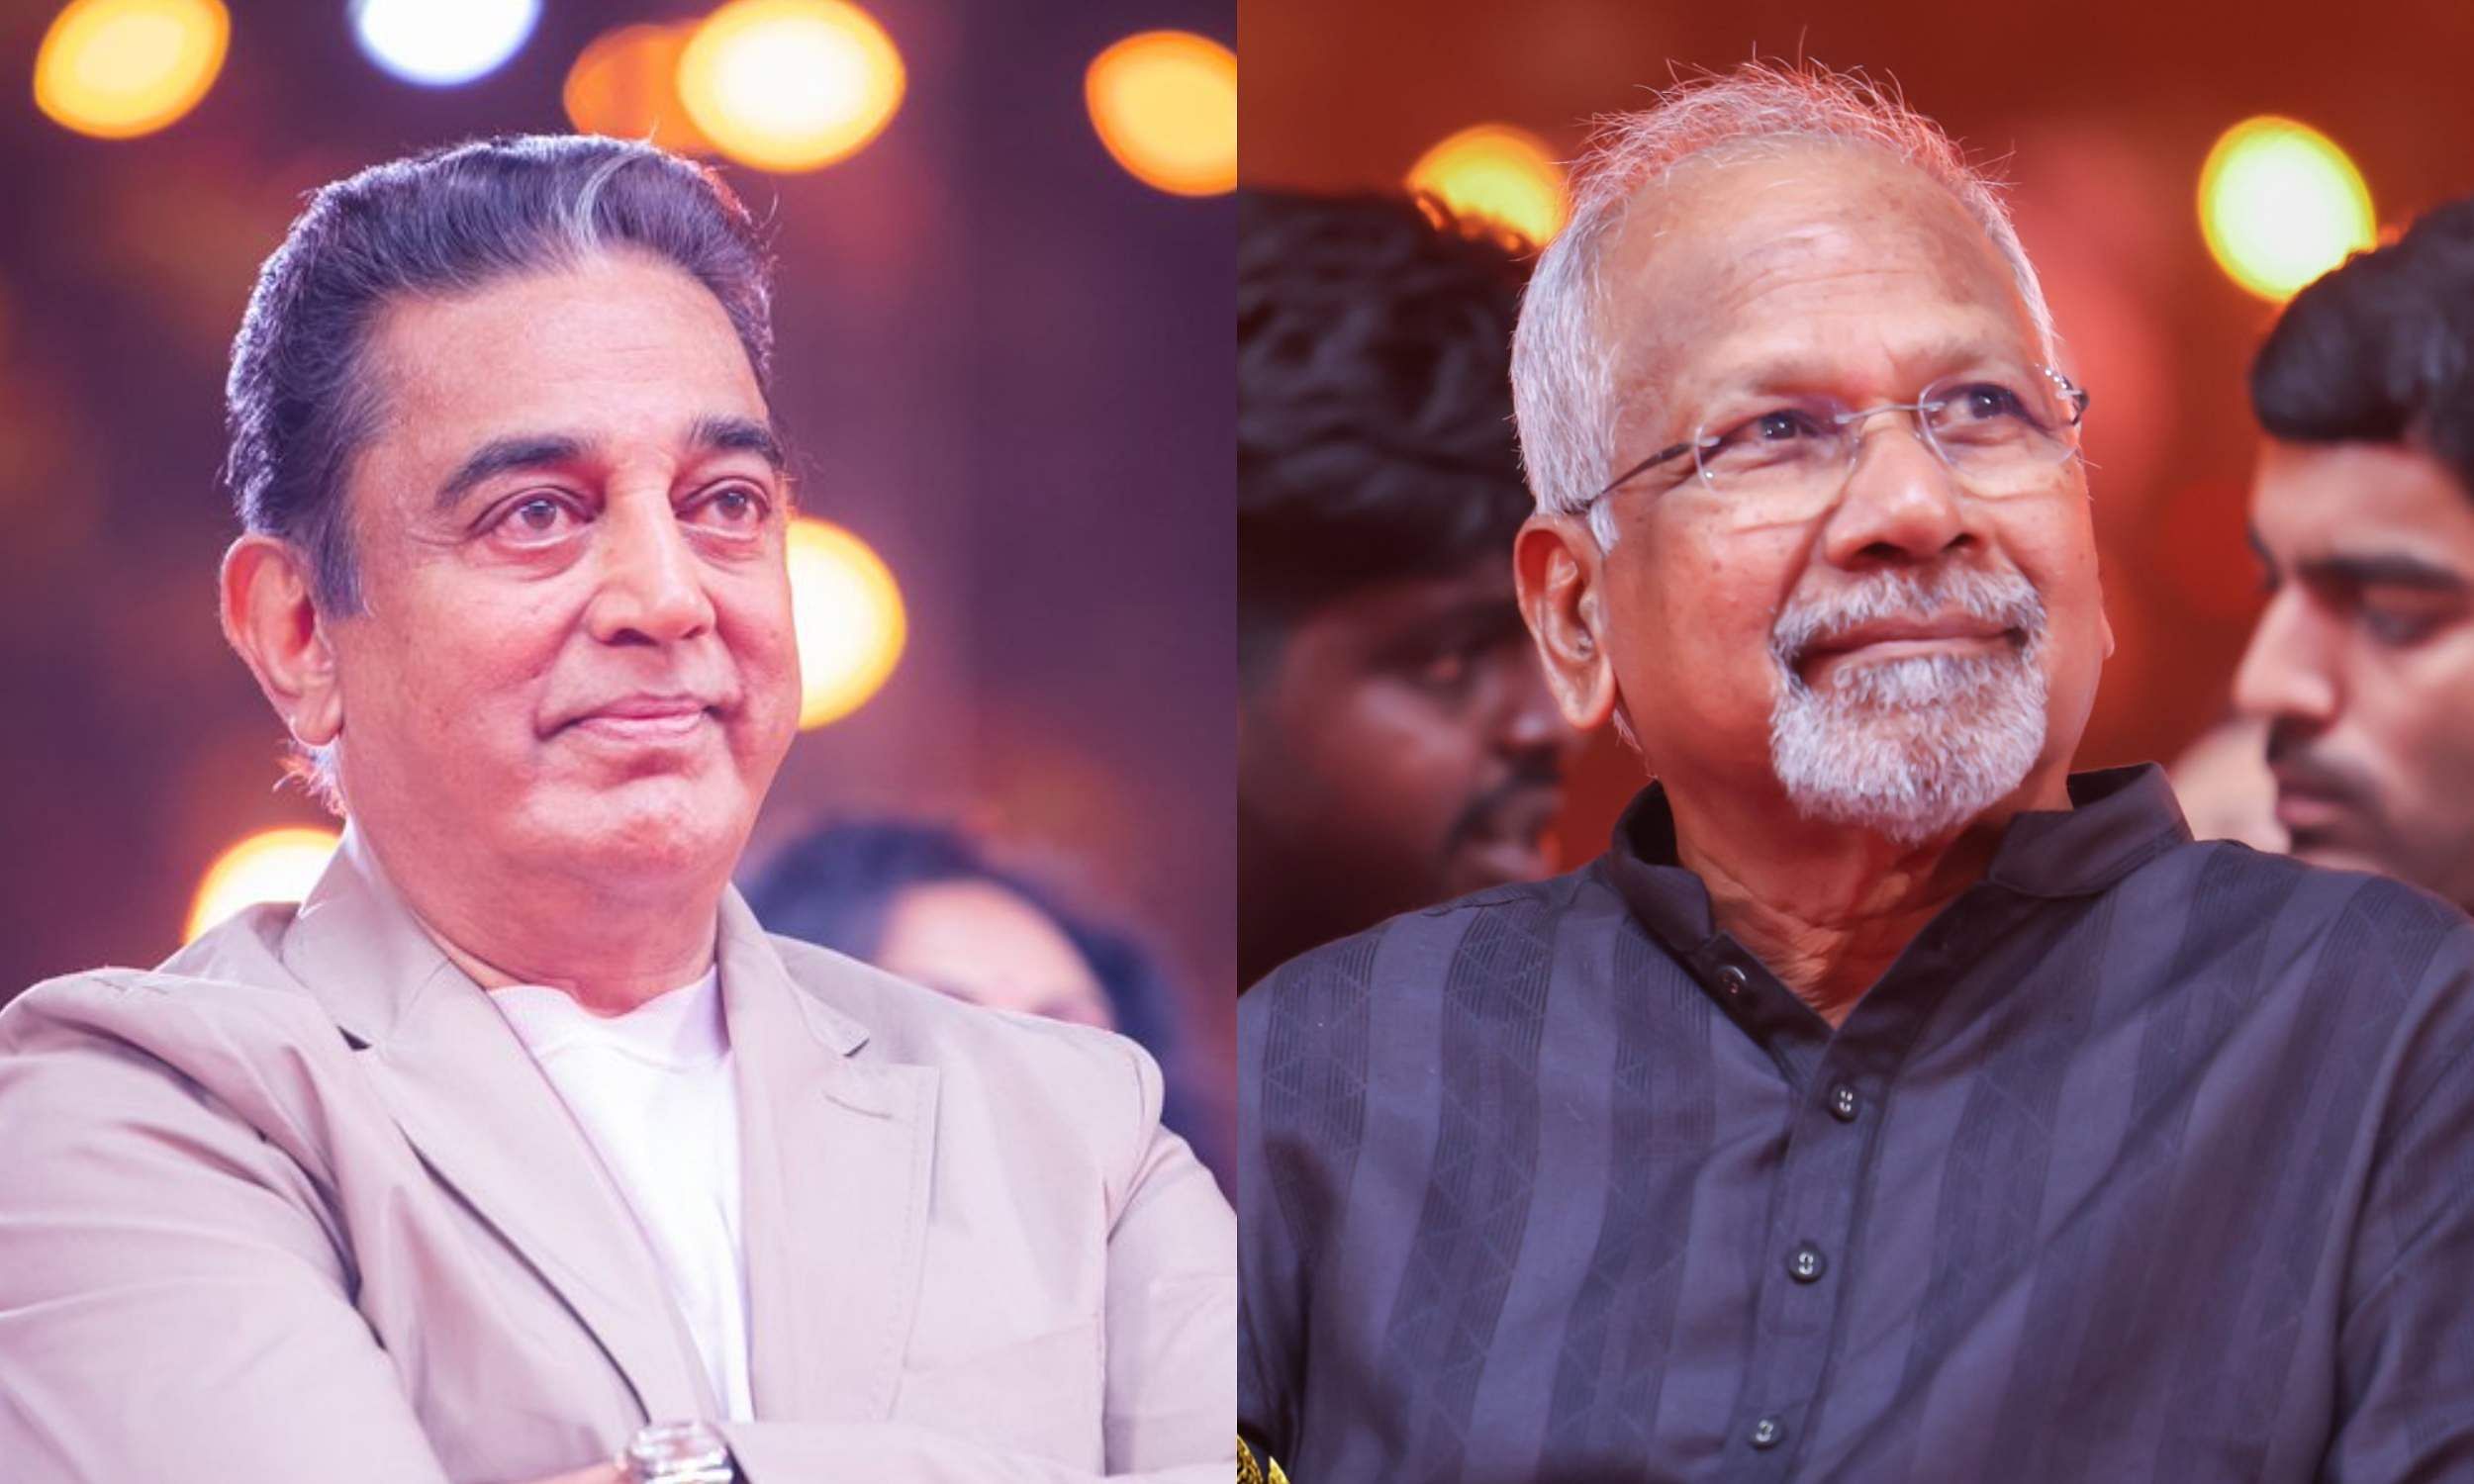 PS II audio and trailer launch: This event is a testimony to Mani Ratnam's success, says Kamal Haasan